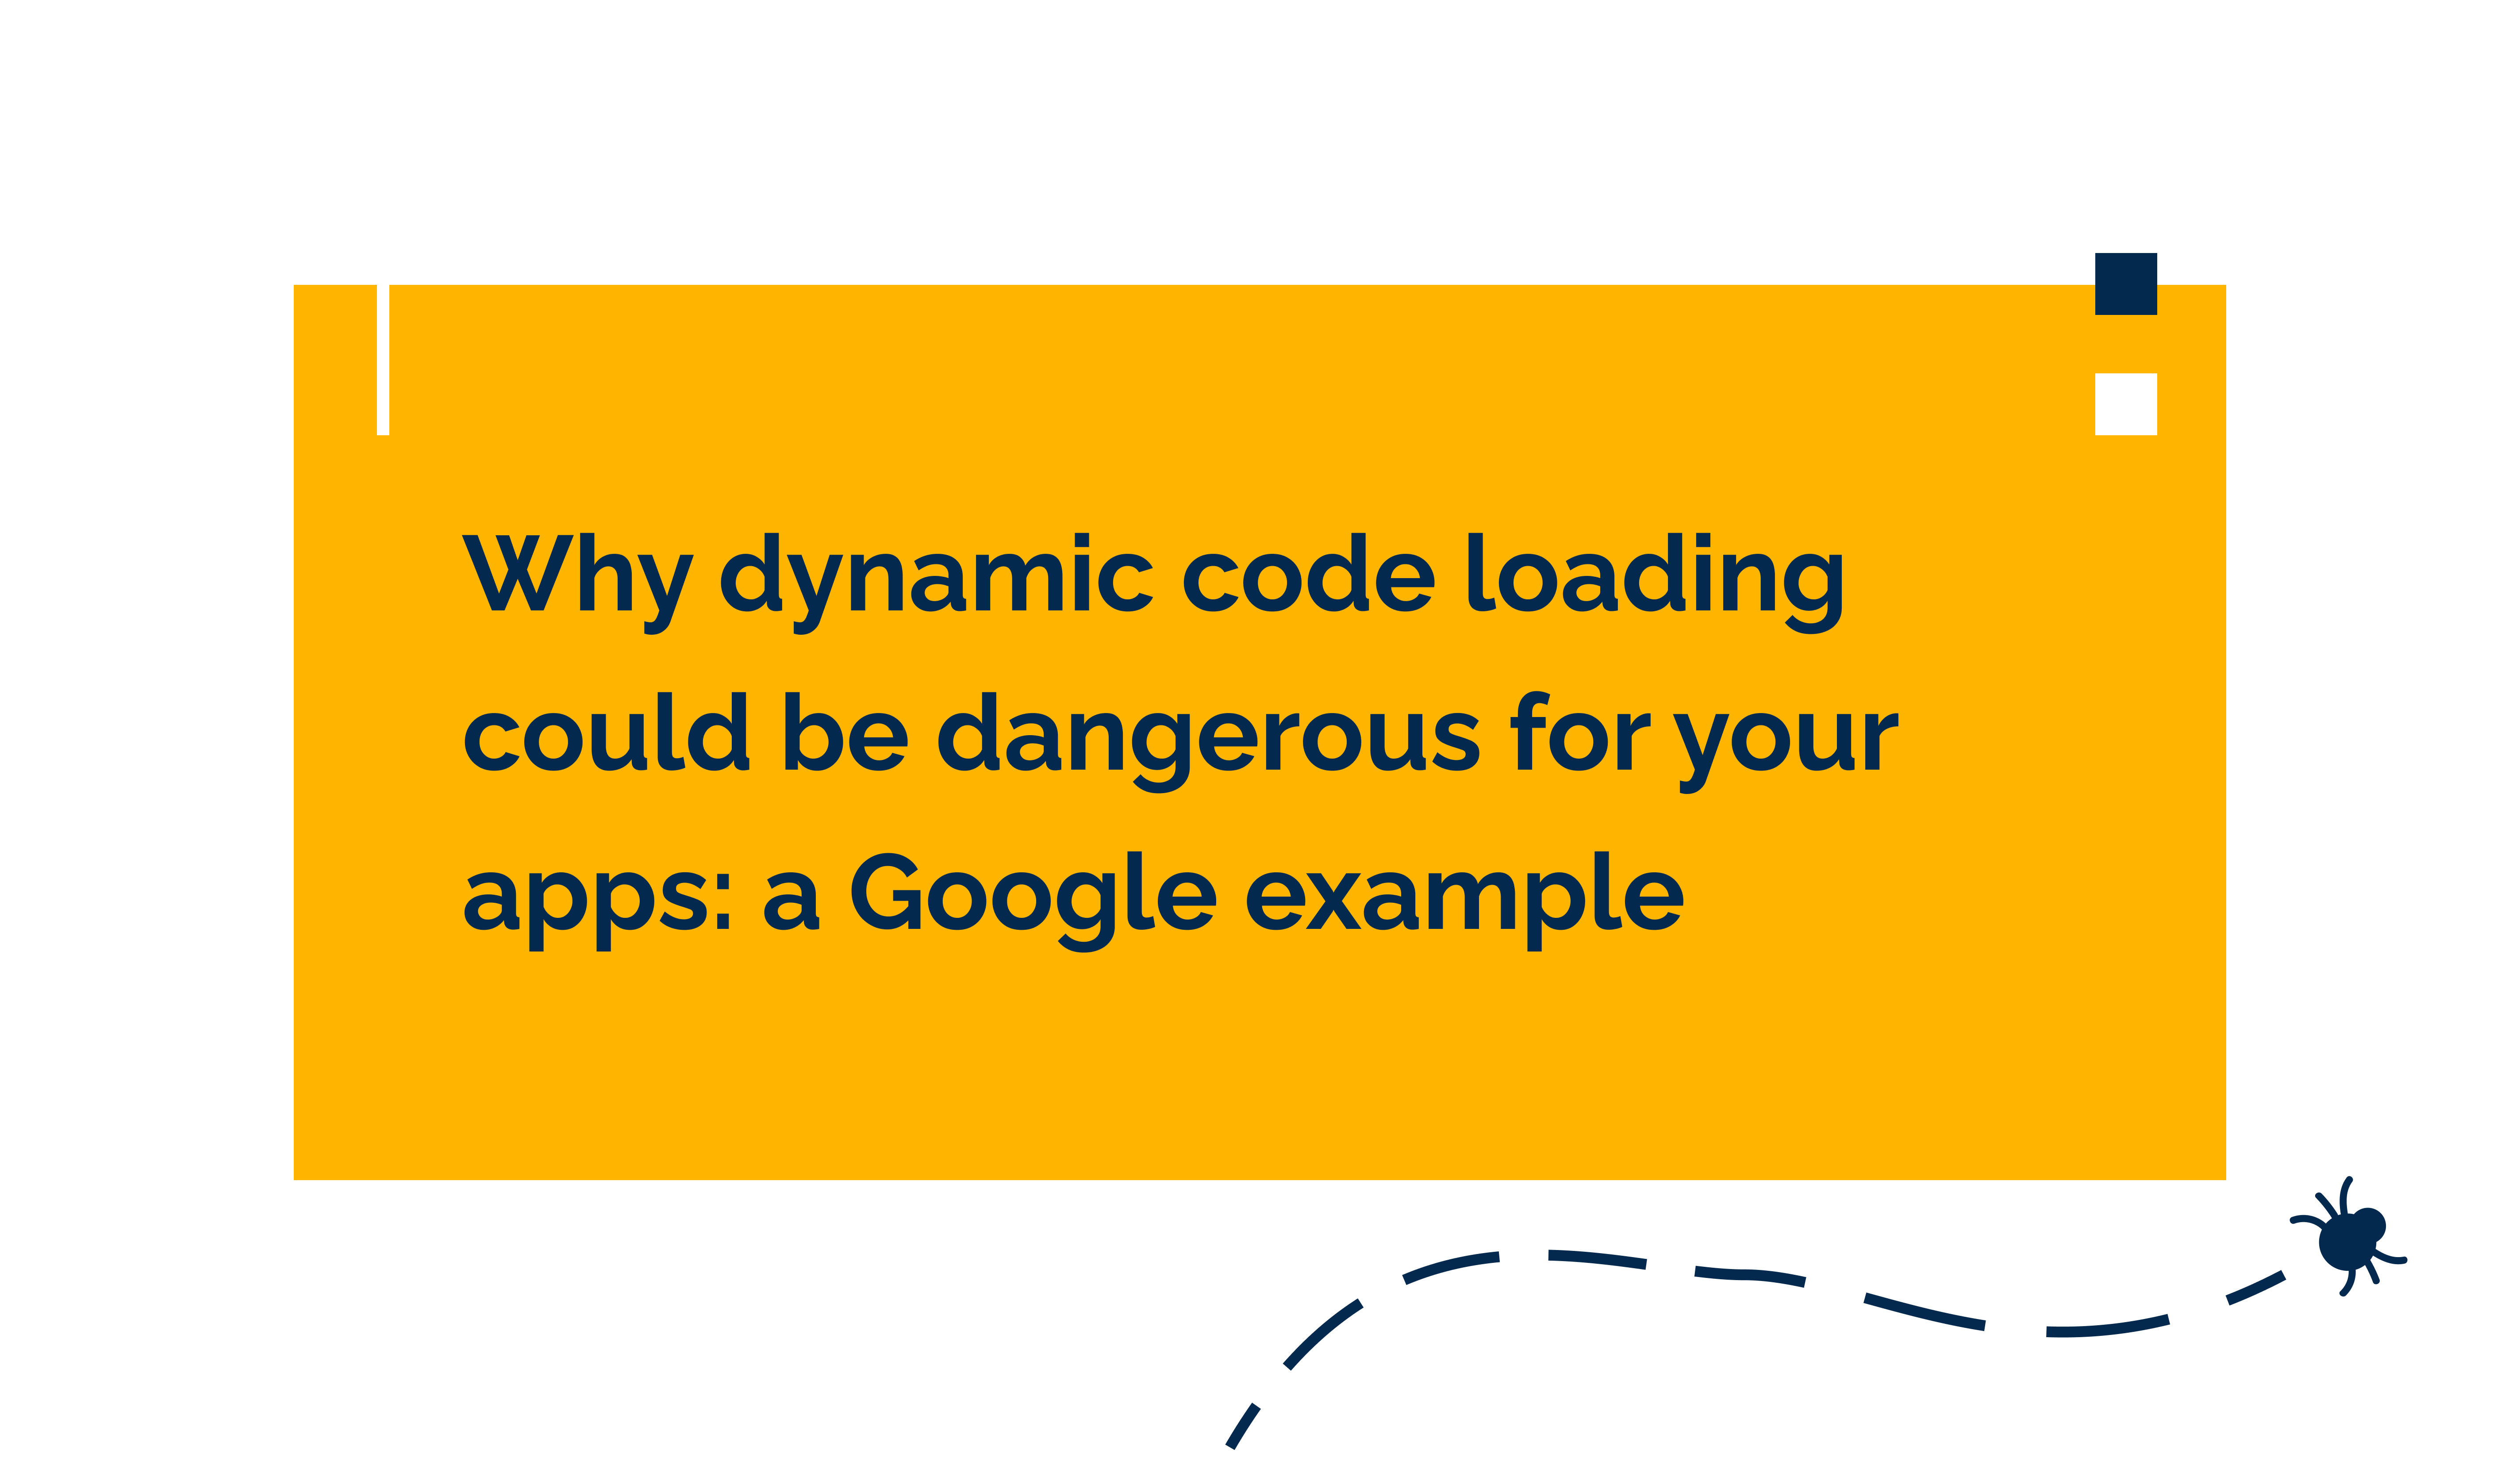 Almost every Android app dynamically loads code from native .so libraries or .dex files. There are also some special libraries like Google Play Core t